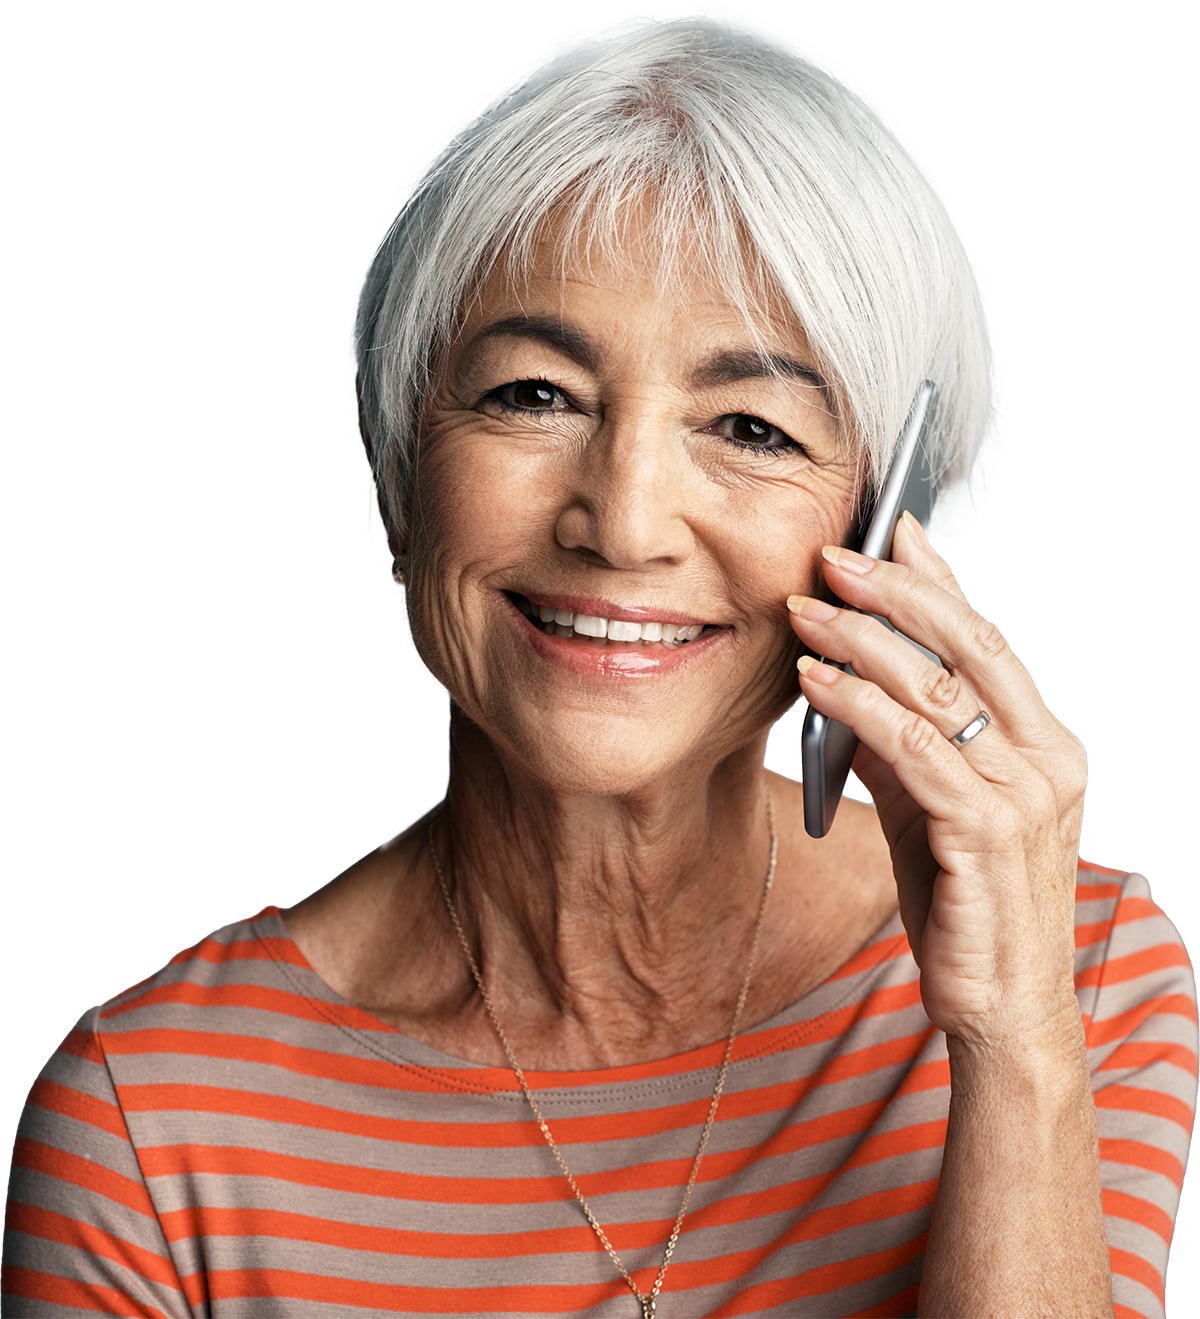 Schedule a Medicare consultation today